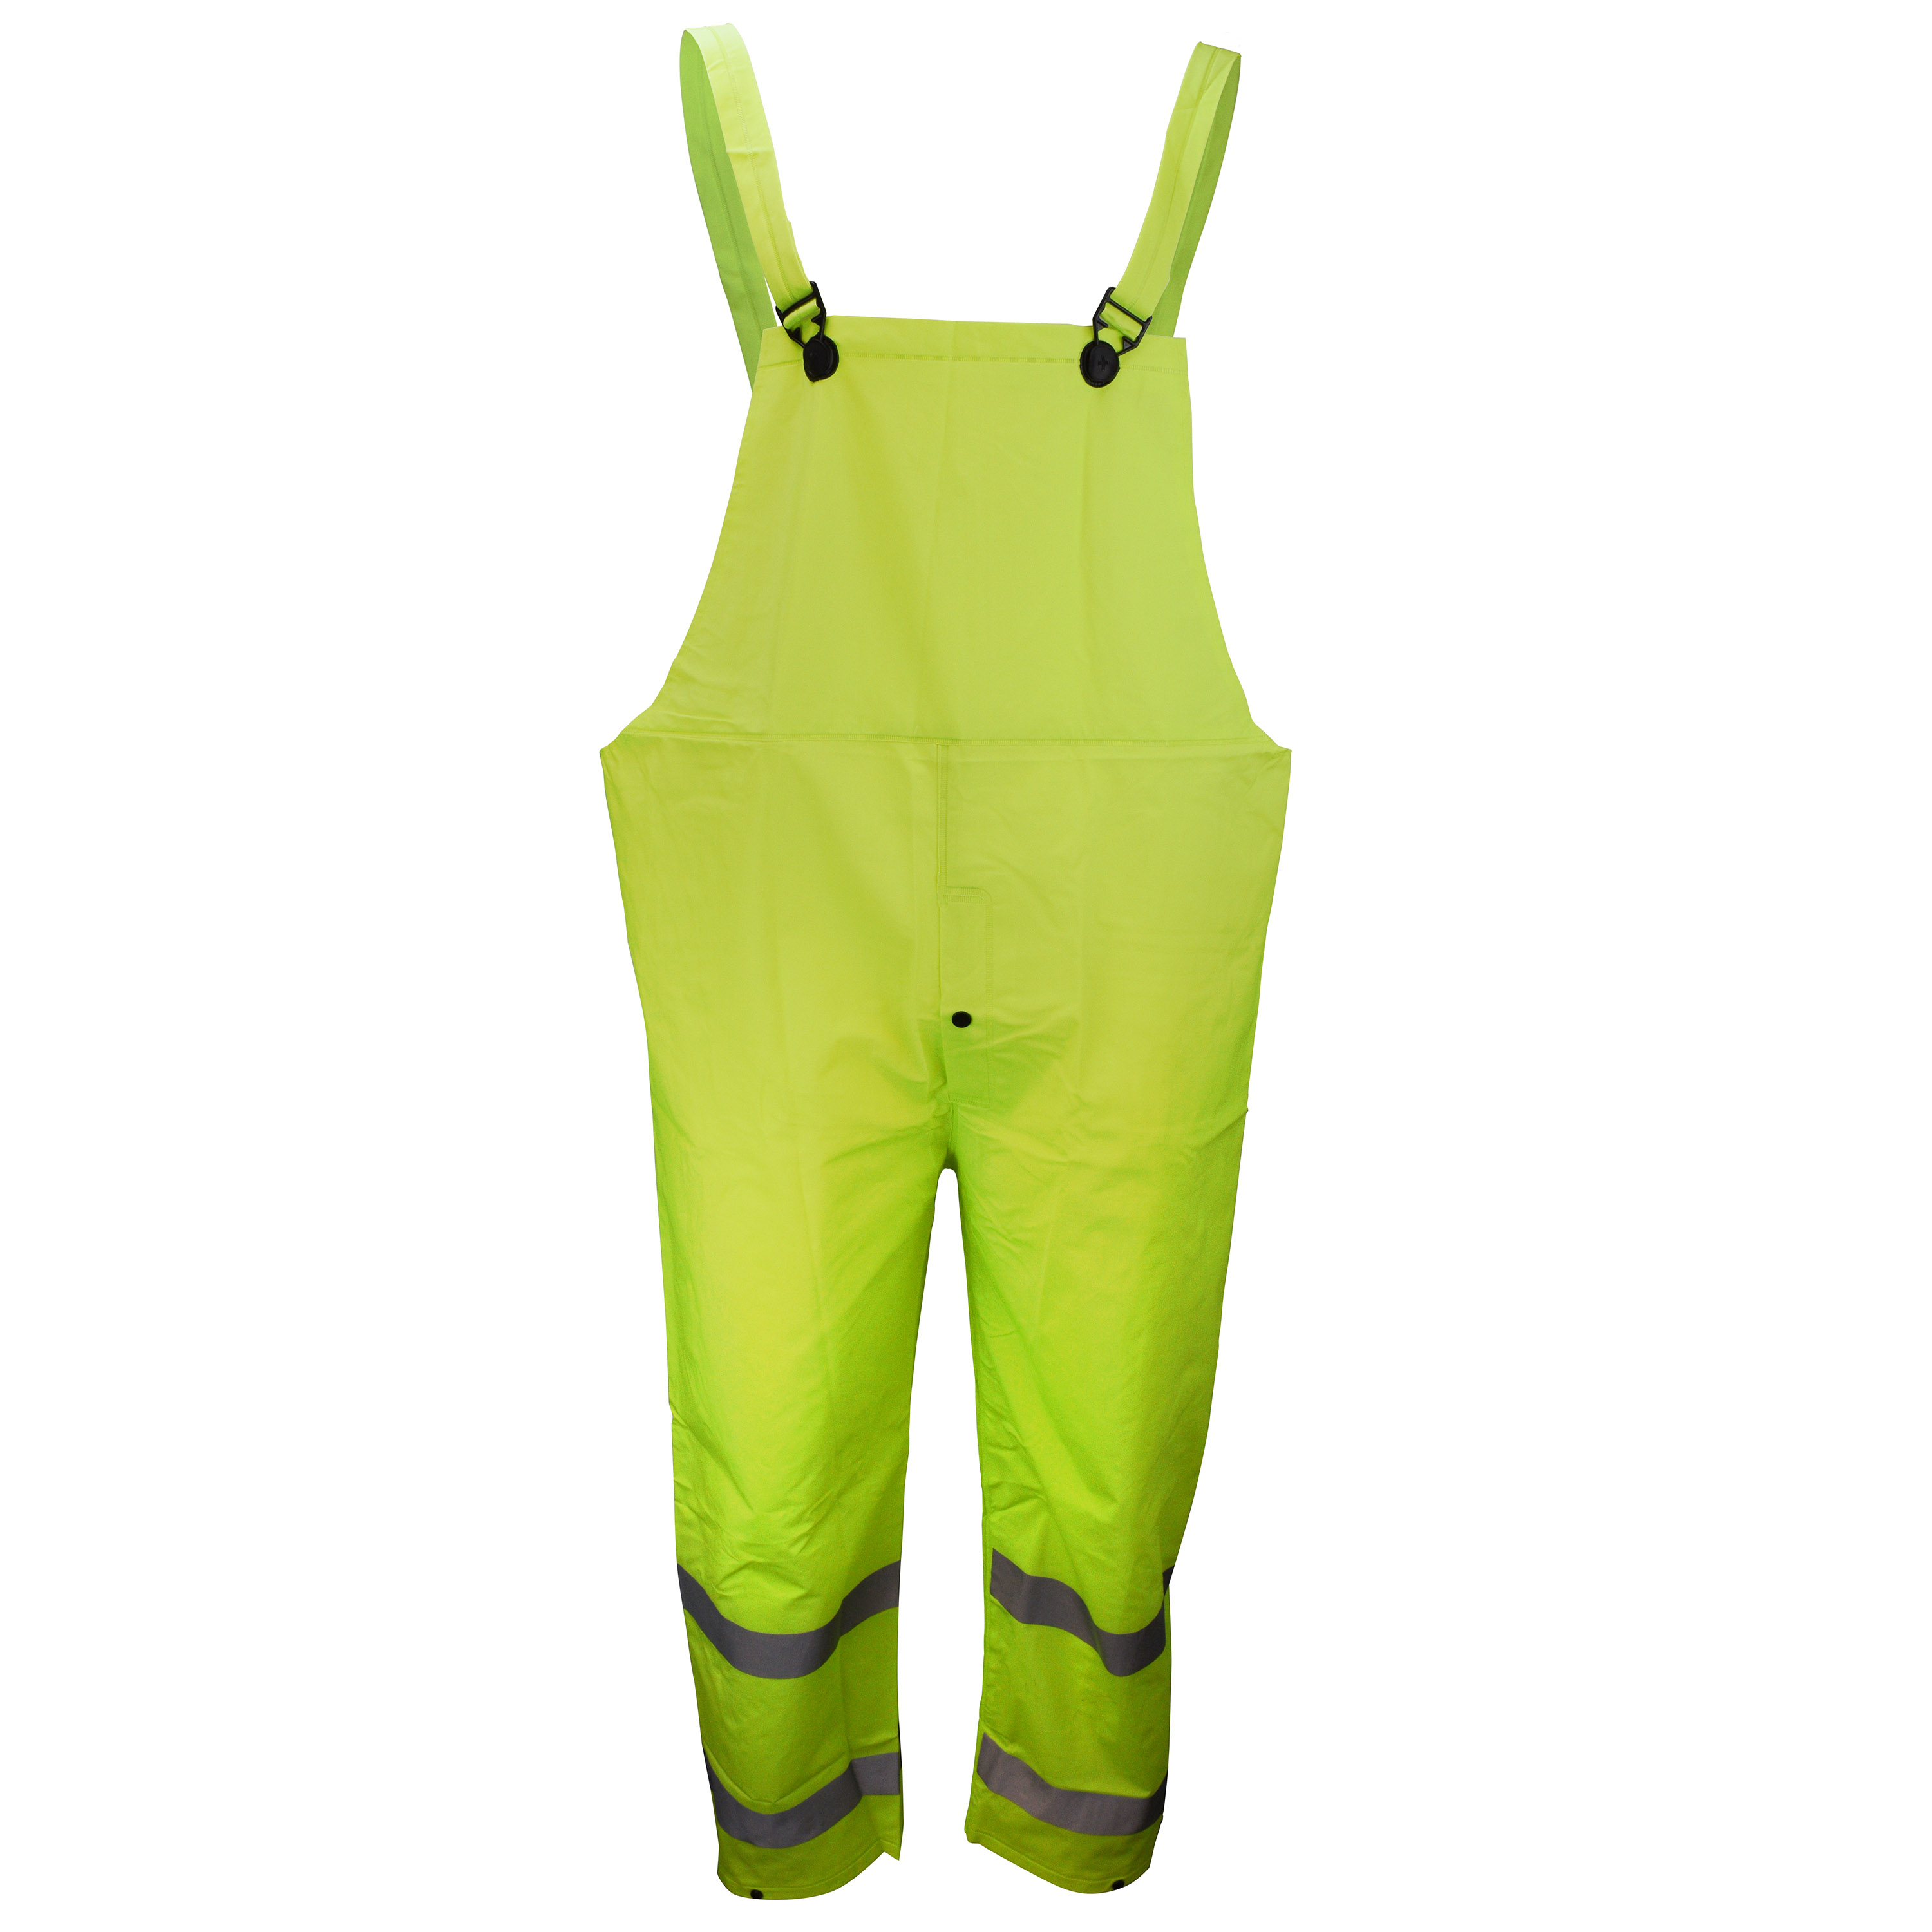 1820BTF Econo-Viz Series Bib Trouser with Fly and Reflective Tape - Hi-Vis Lime - Size 2X